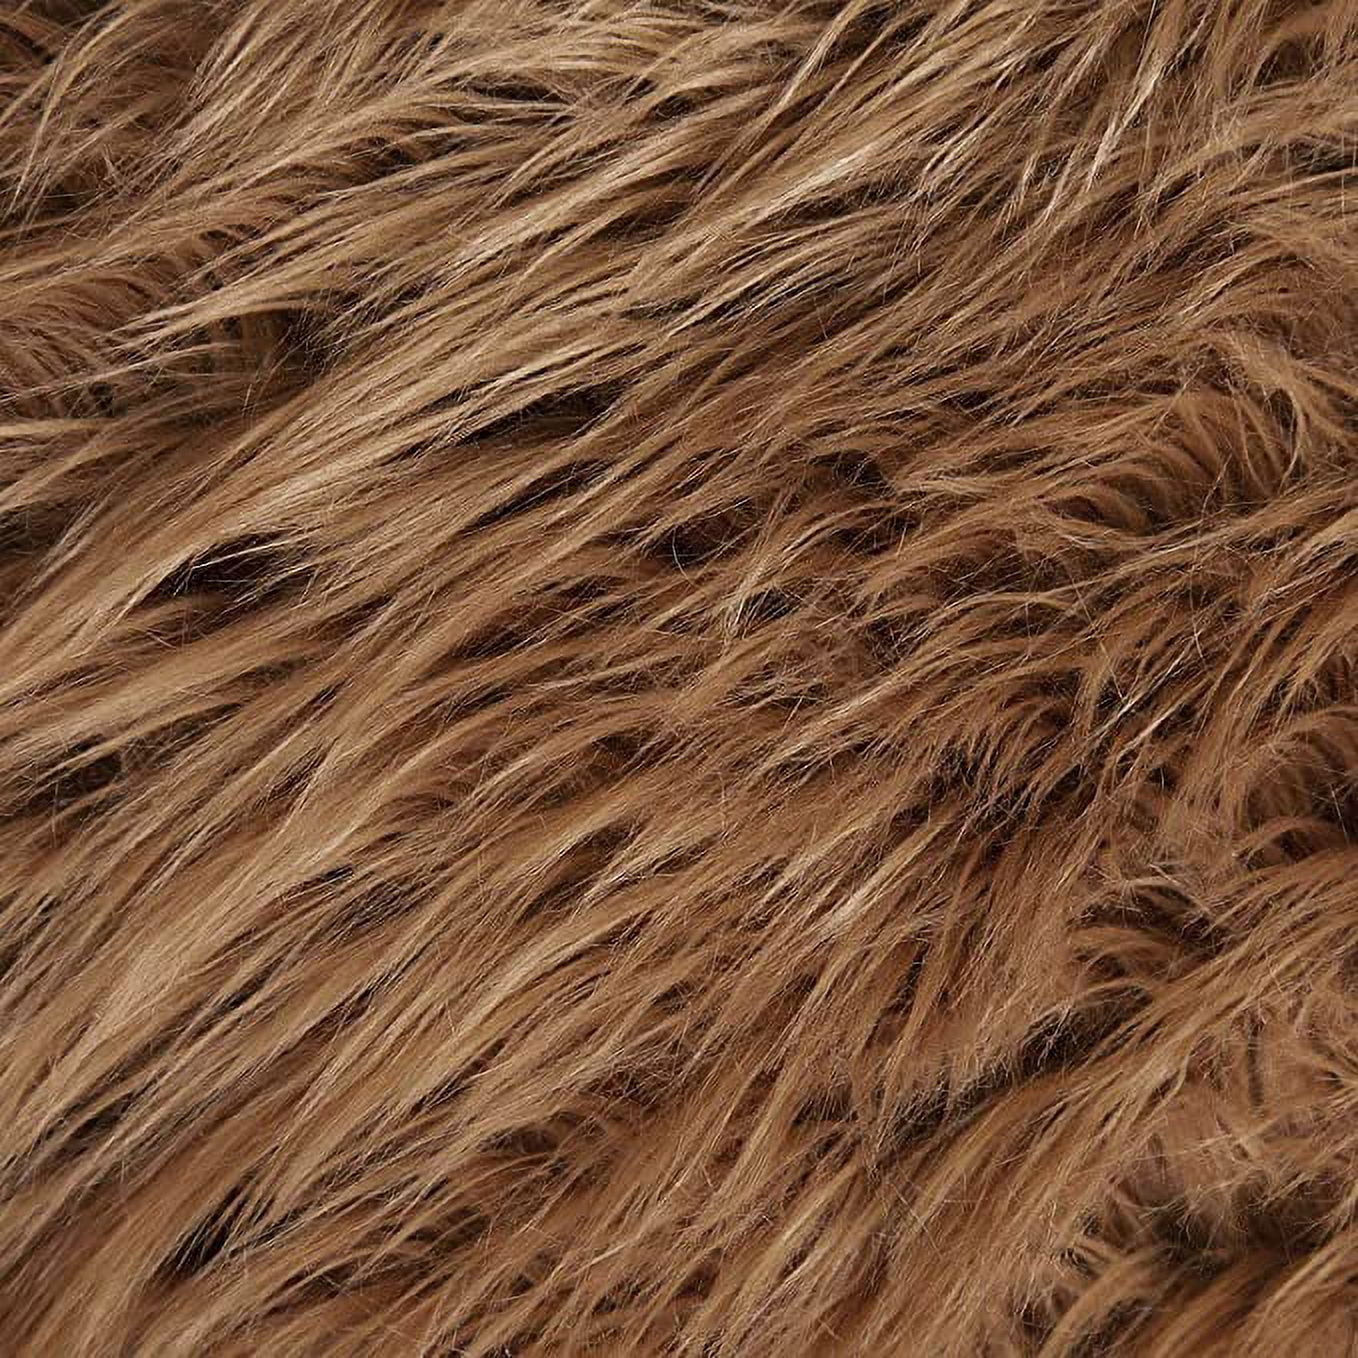 Lyrow Faux Fur Fabric Shaggy Craft Fur 54 x 60 Inch 1.5 x 1.6 yd for  Crafts, DIY, Hobby, Costume Design, Decoration, Sewing Apparel, Rugs,  Pillows